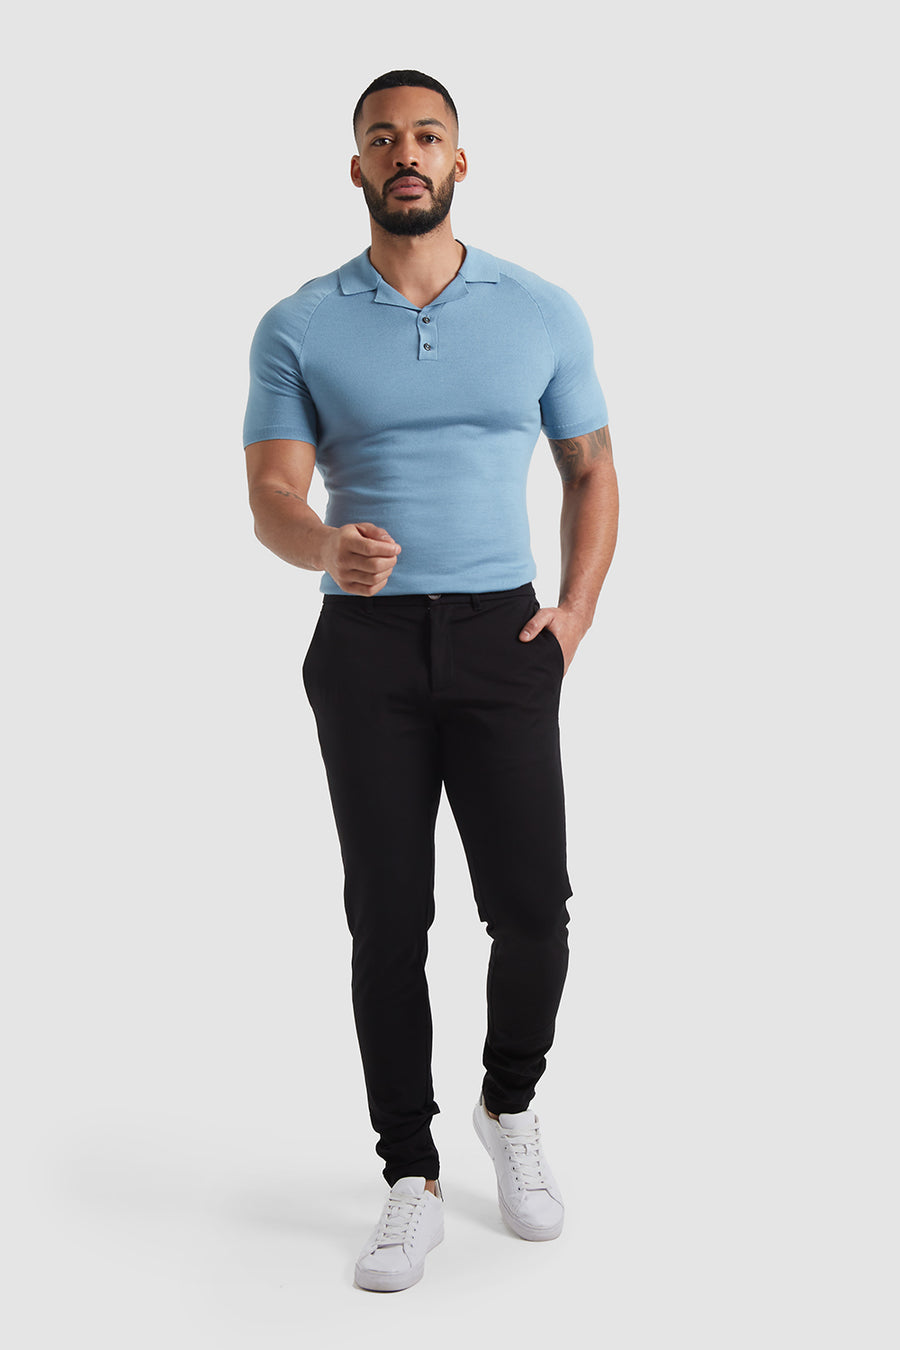 Chino Pants in Black - TAILORED ATHLETE - USA